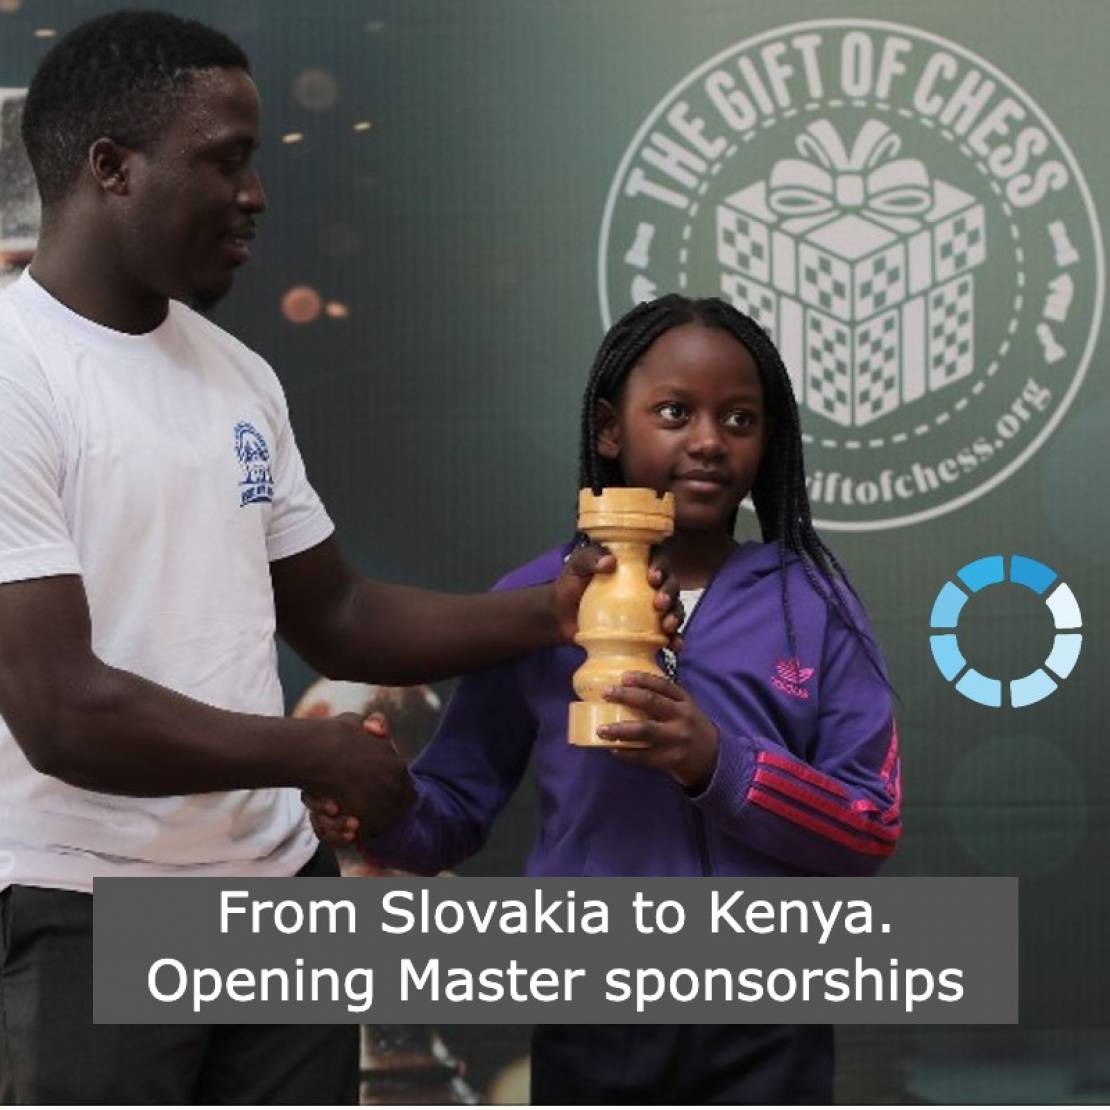 Opening Master is proud sponsor of junior chess team. From Slovakia to Kenya